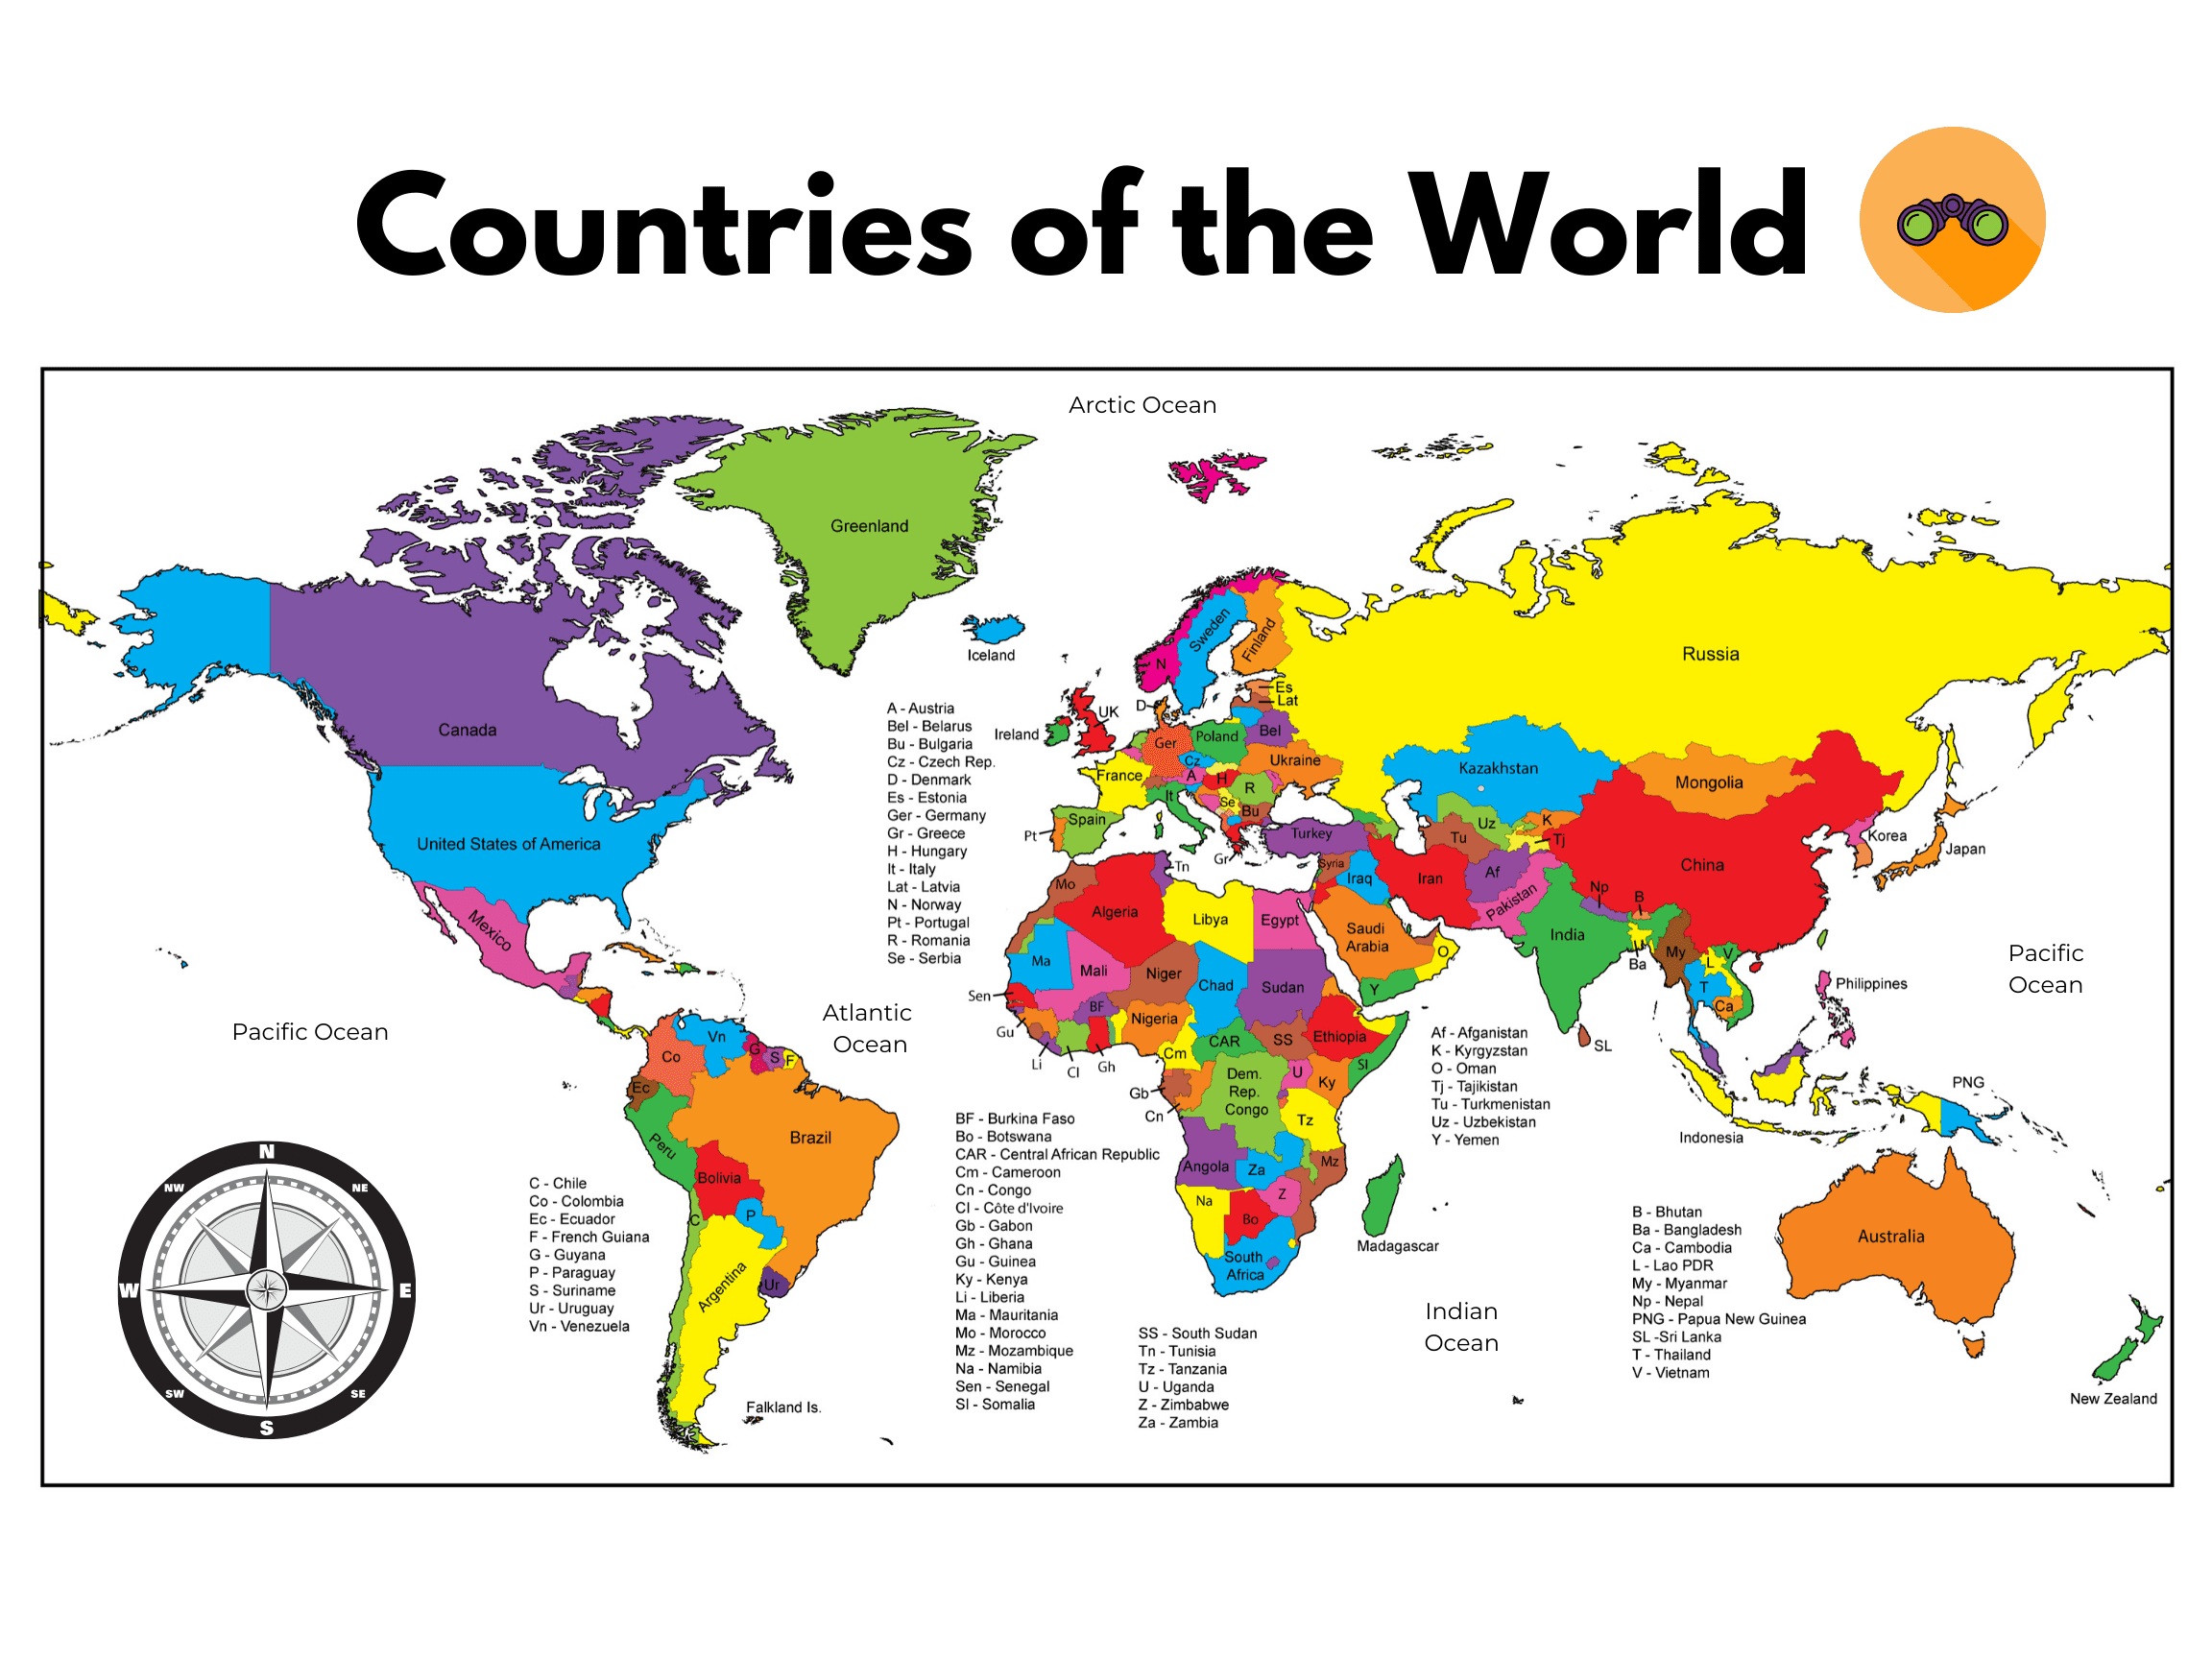 alphabetical-list-of-countries